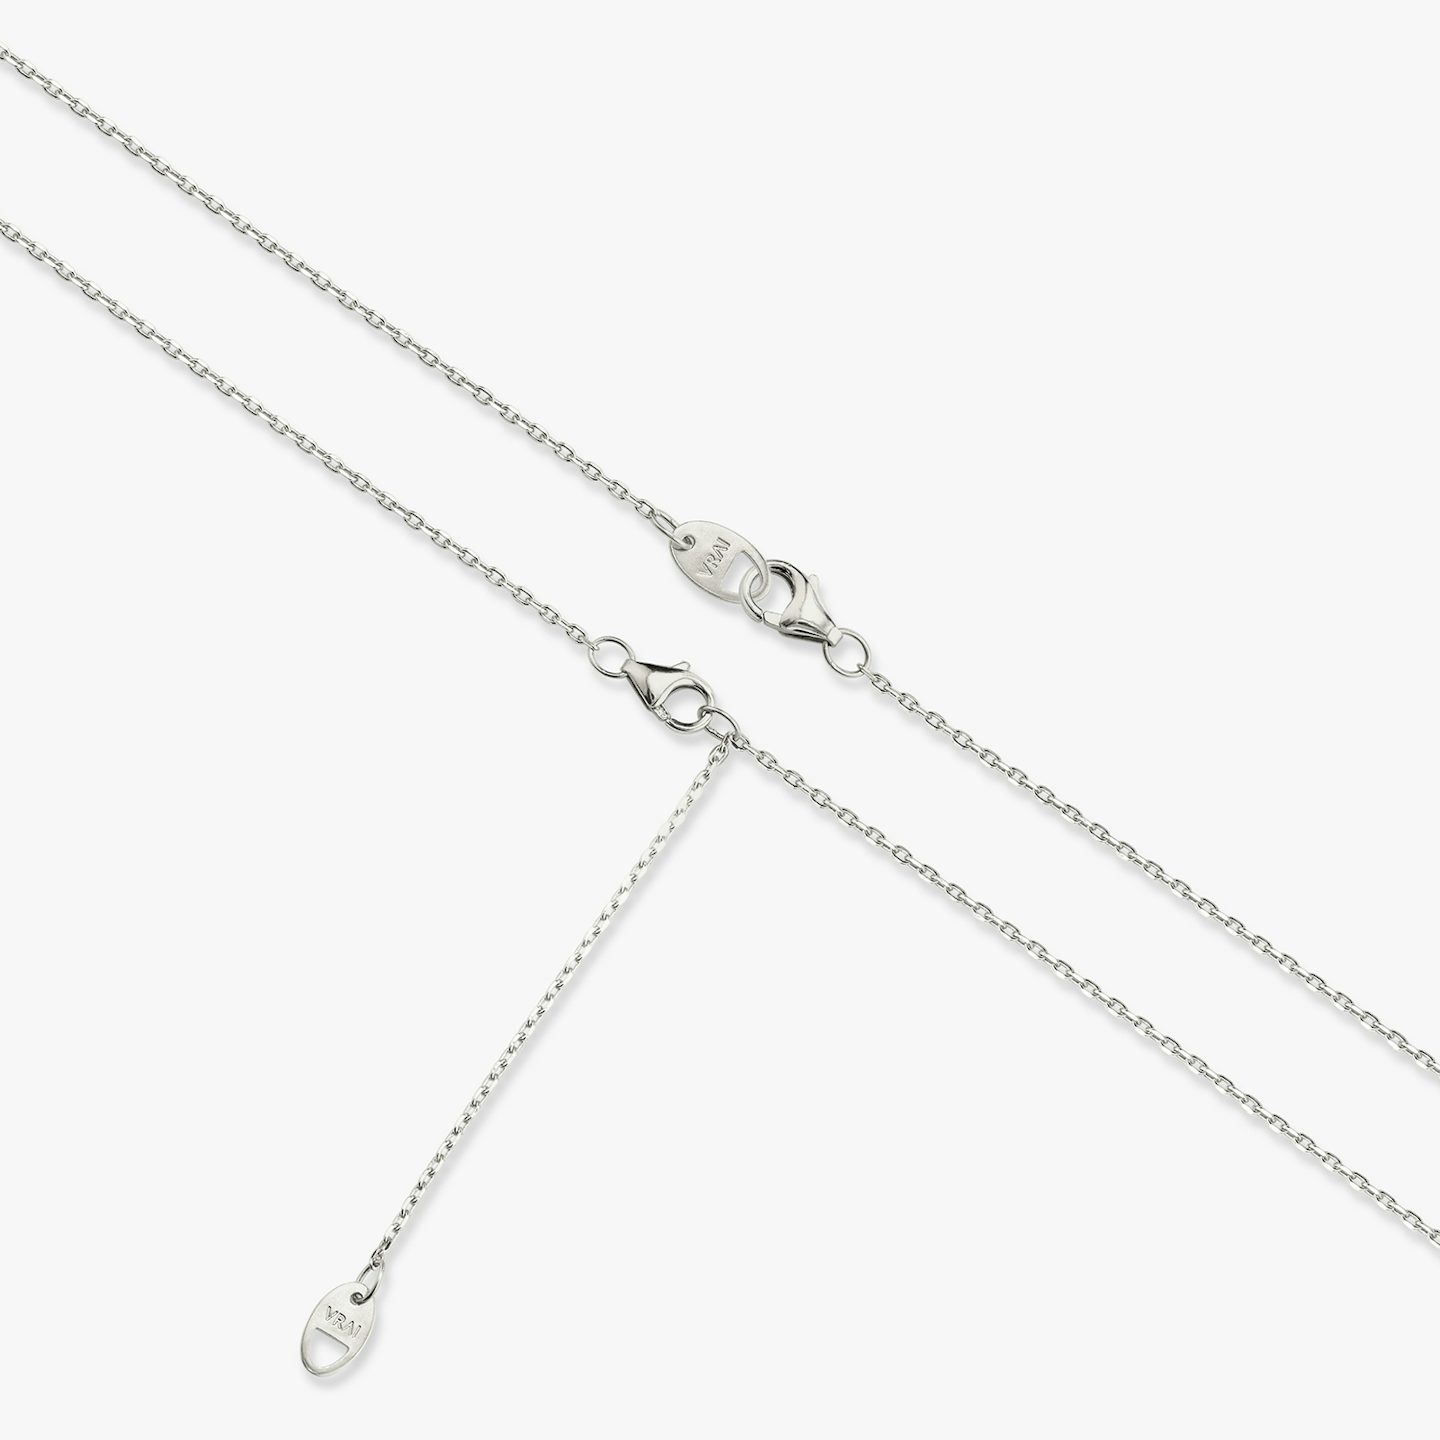 VRAI Solitaire Necklace | Oval | 14k | White Gold | caratWeight: 0.50ct